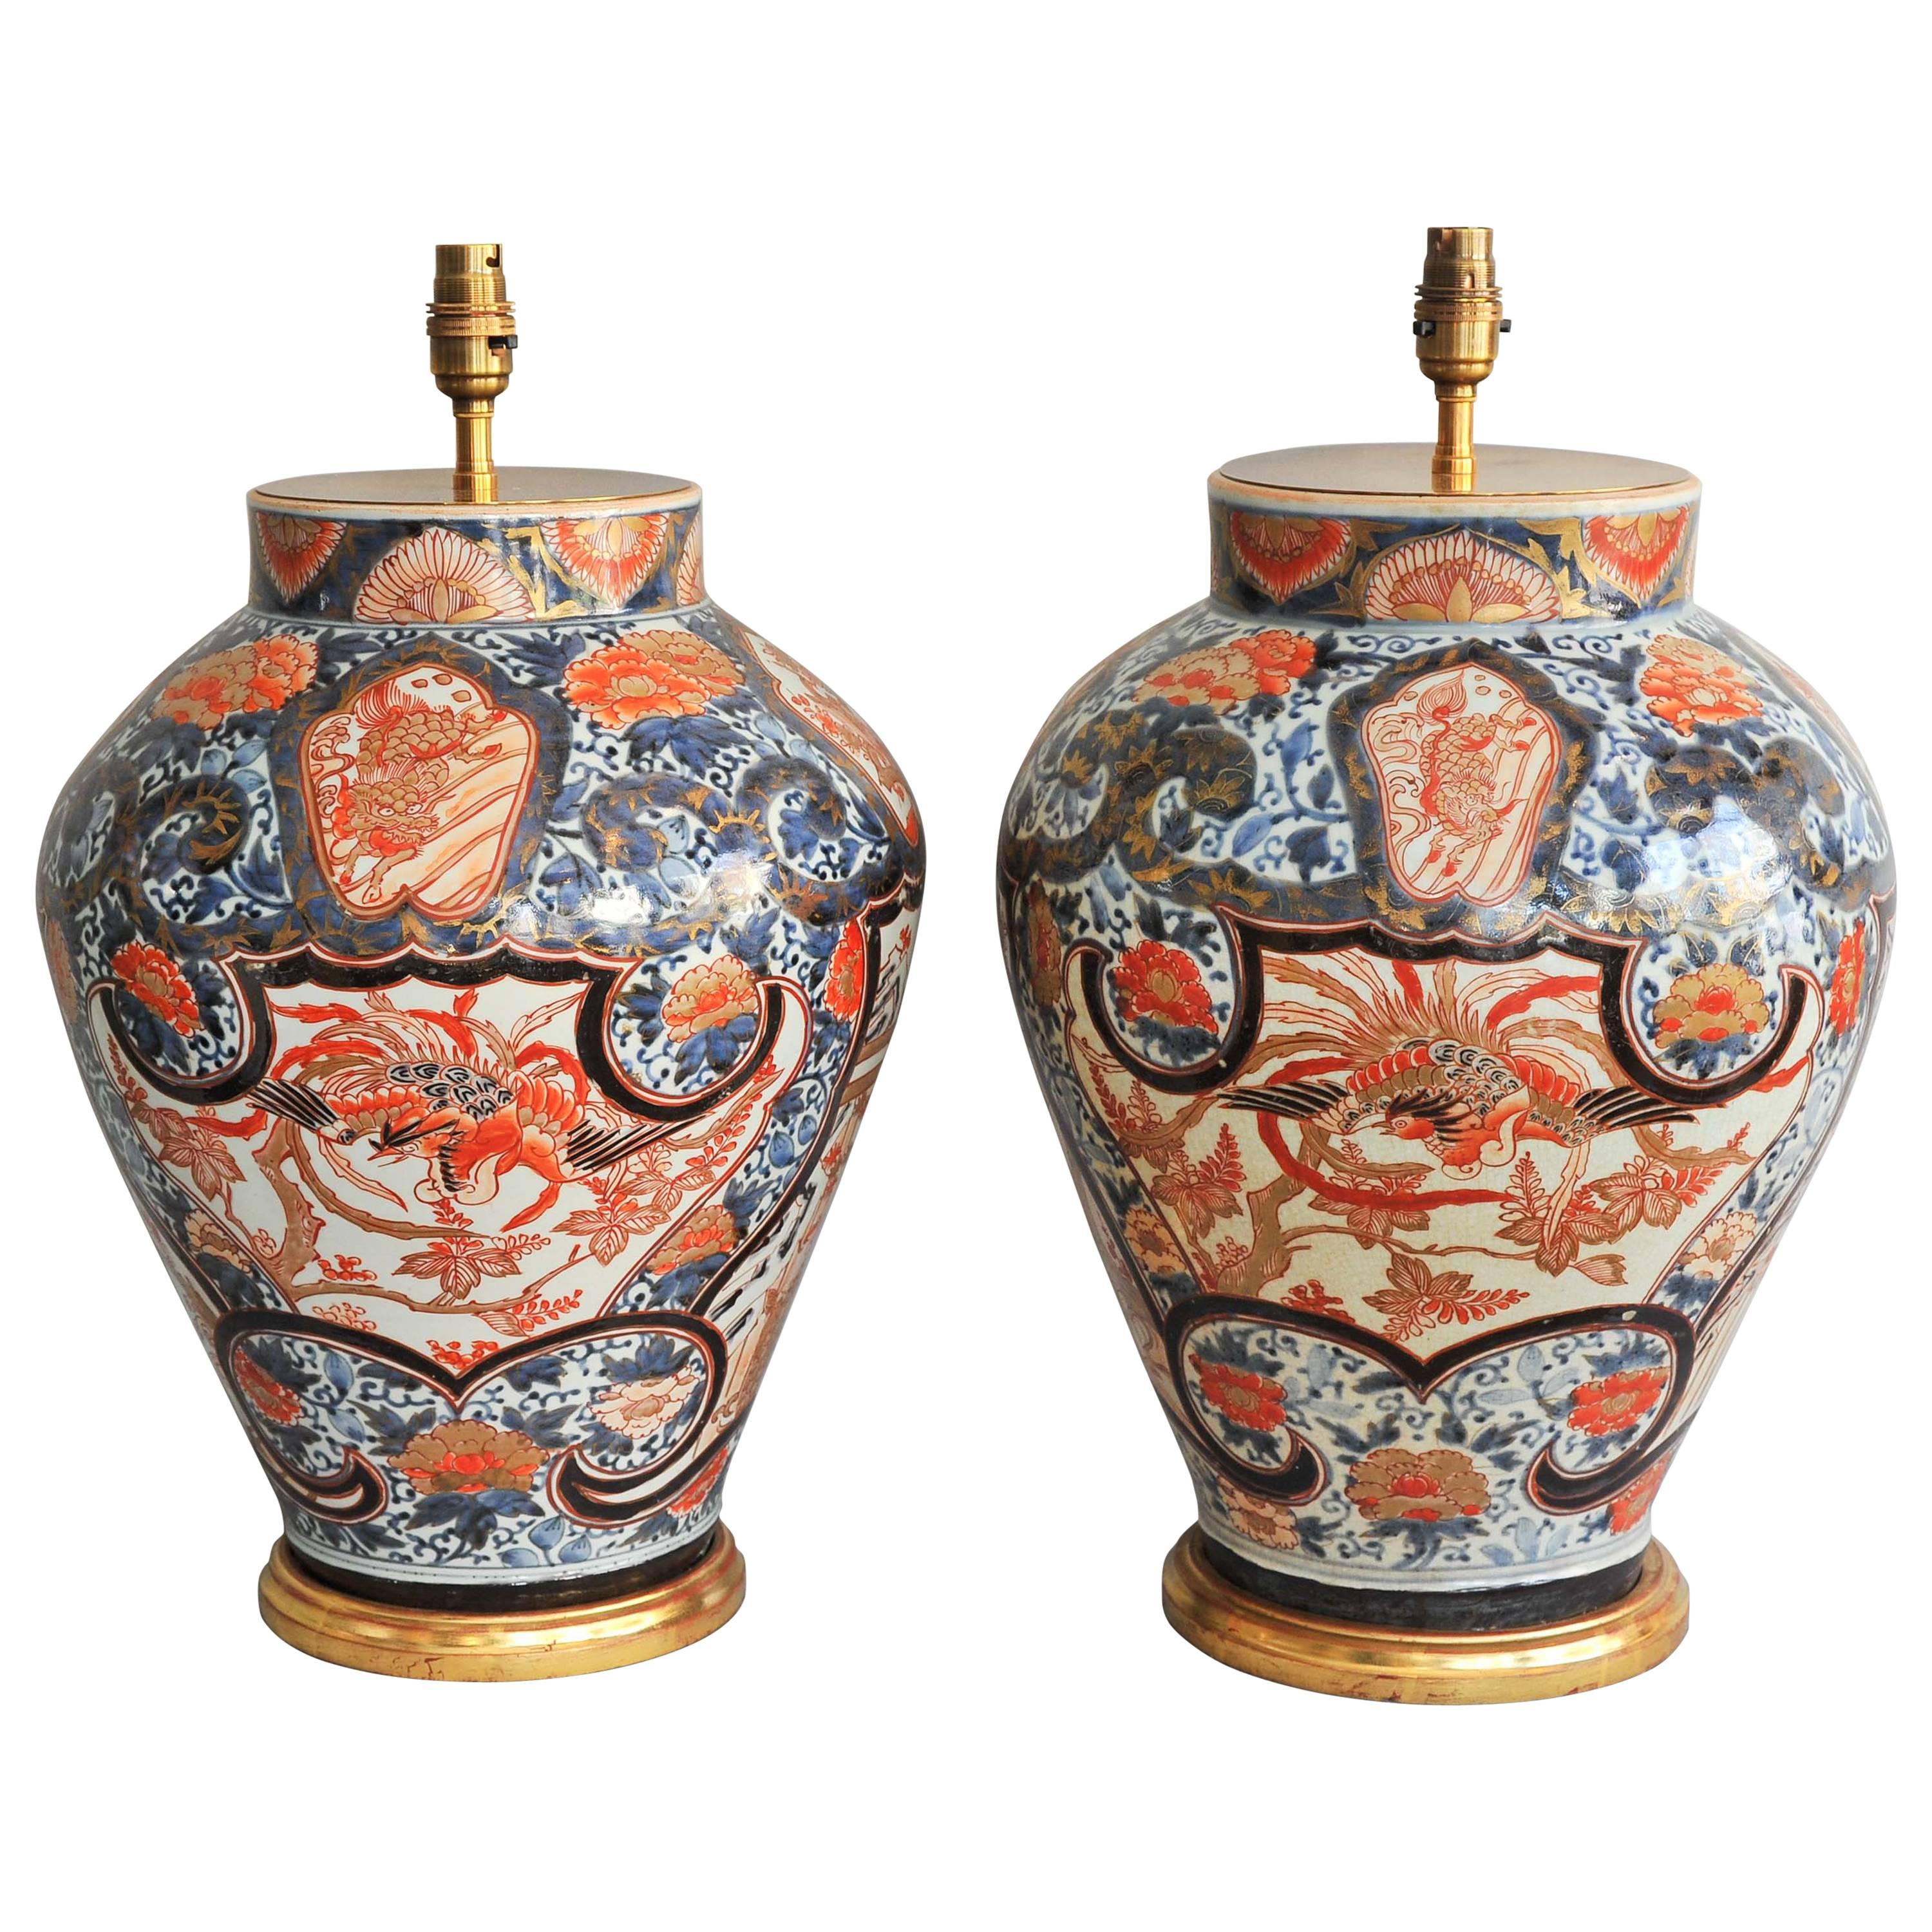 A Fine Pair of Early 18th Century Lamped Imari Vases on Gilt Bases